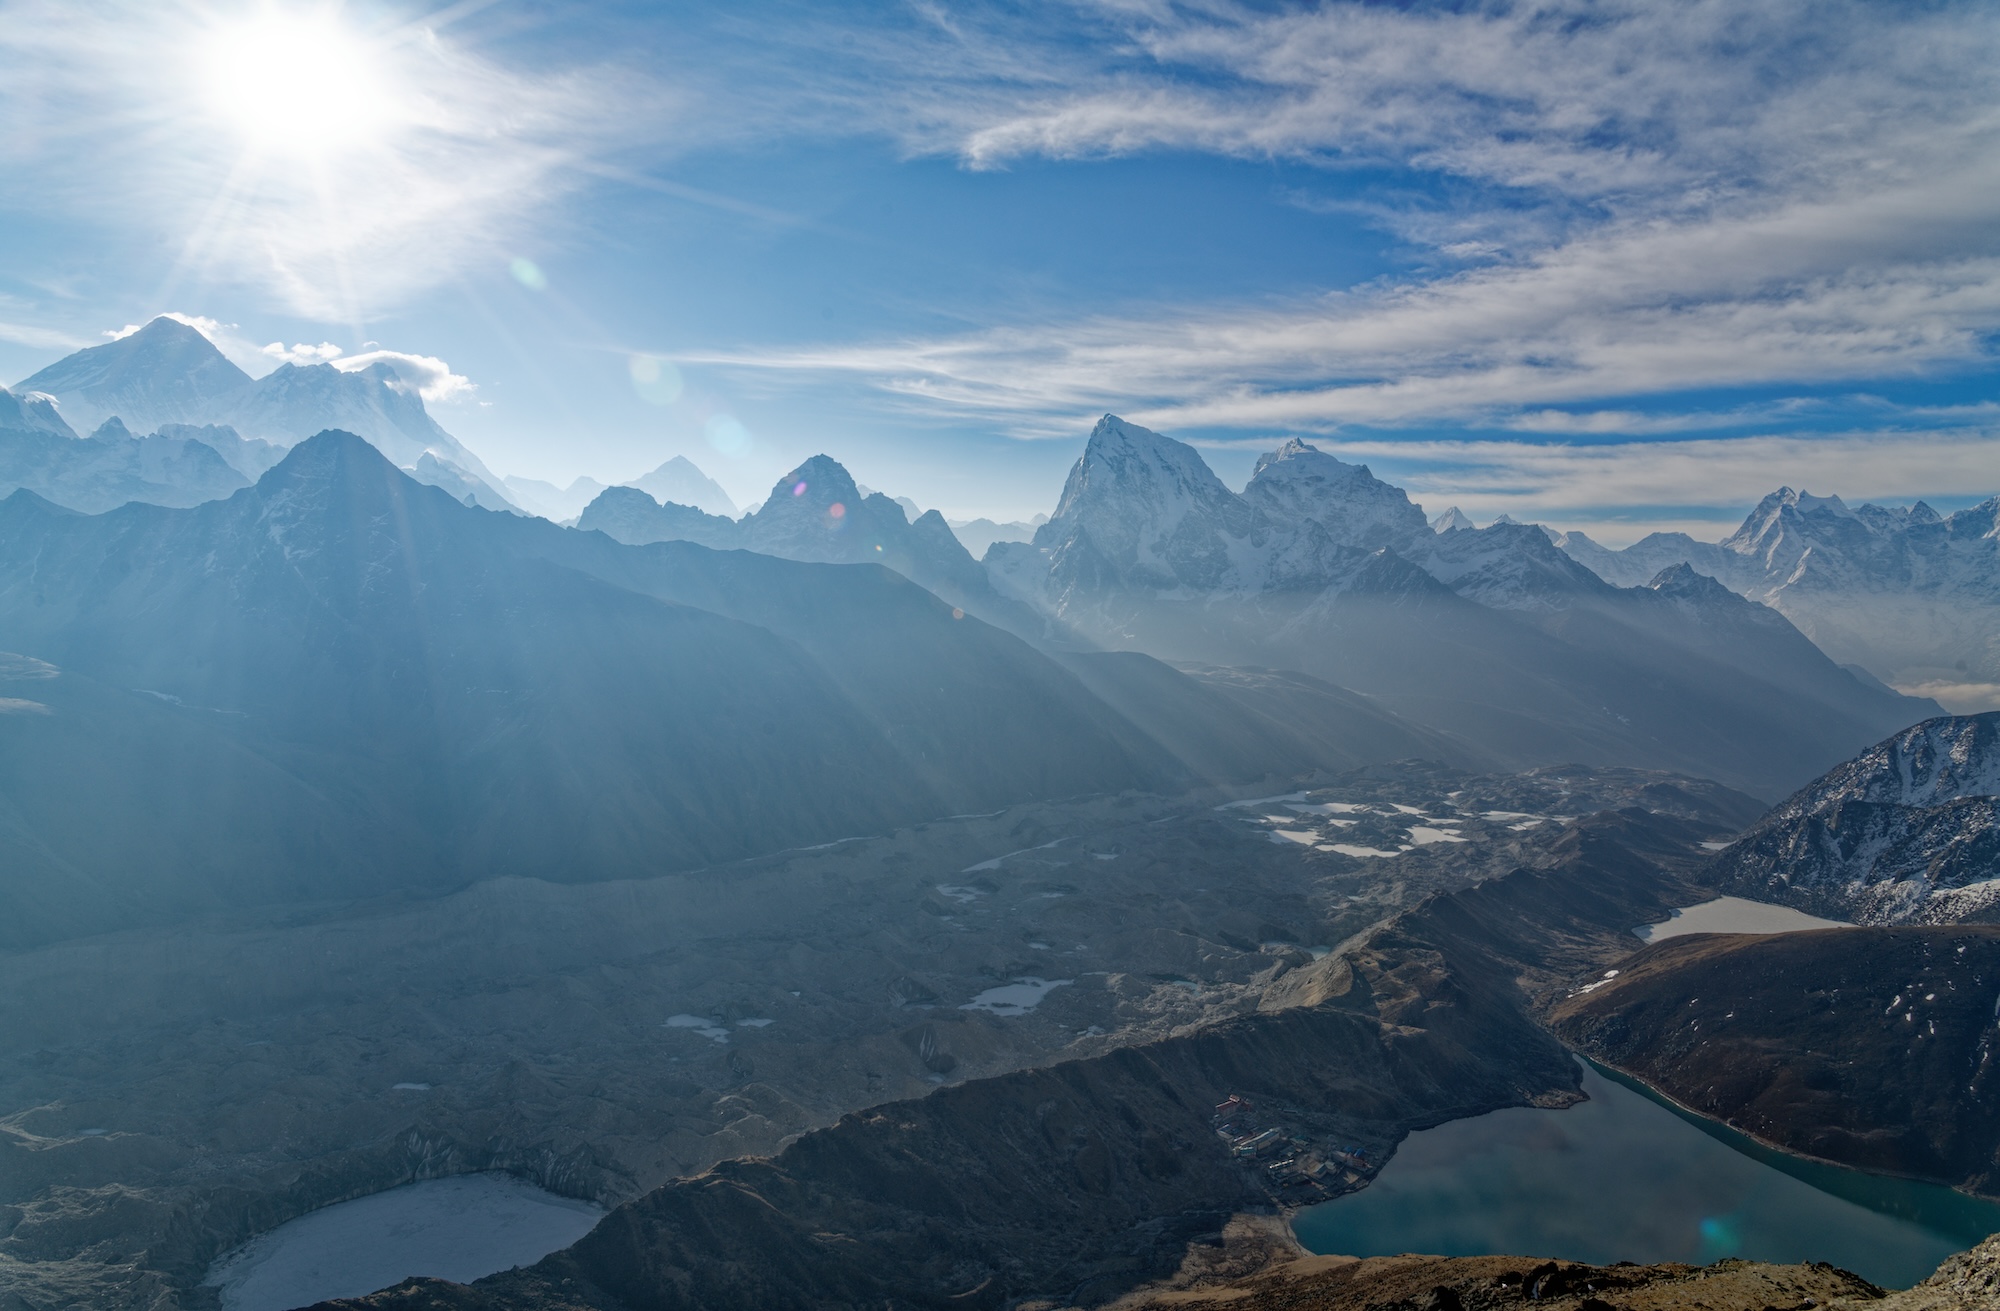 Sunrise over Everest from Gokyo Ri. Gokyo village is on the edge of the lake in the bottom right. 